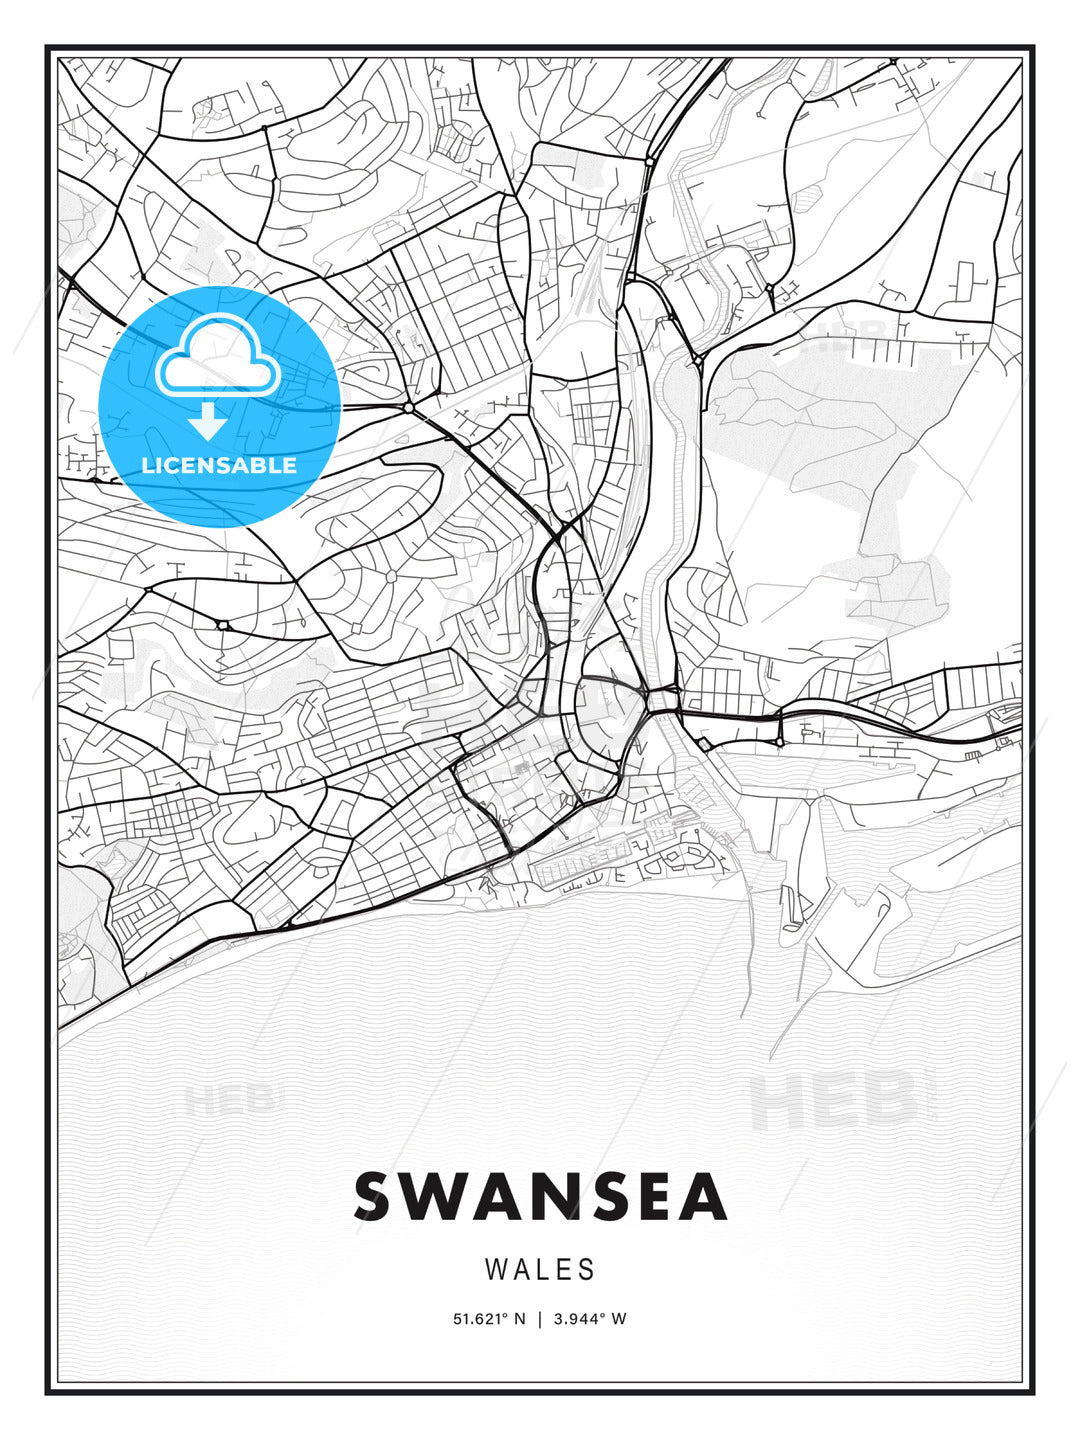 Swansea, Wales, Modern Print Template in Various Formats - HEBSTREITS Sketches